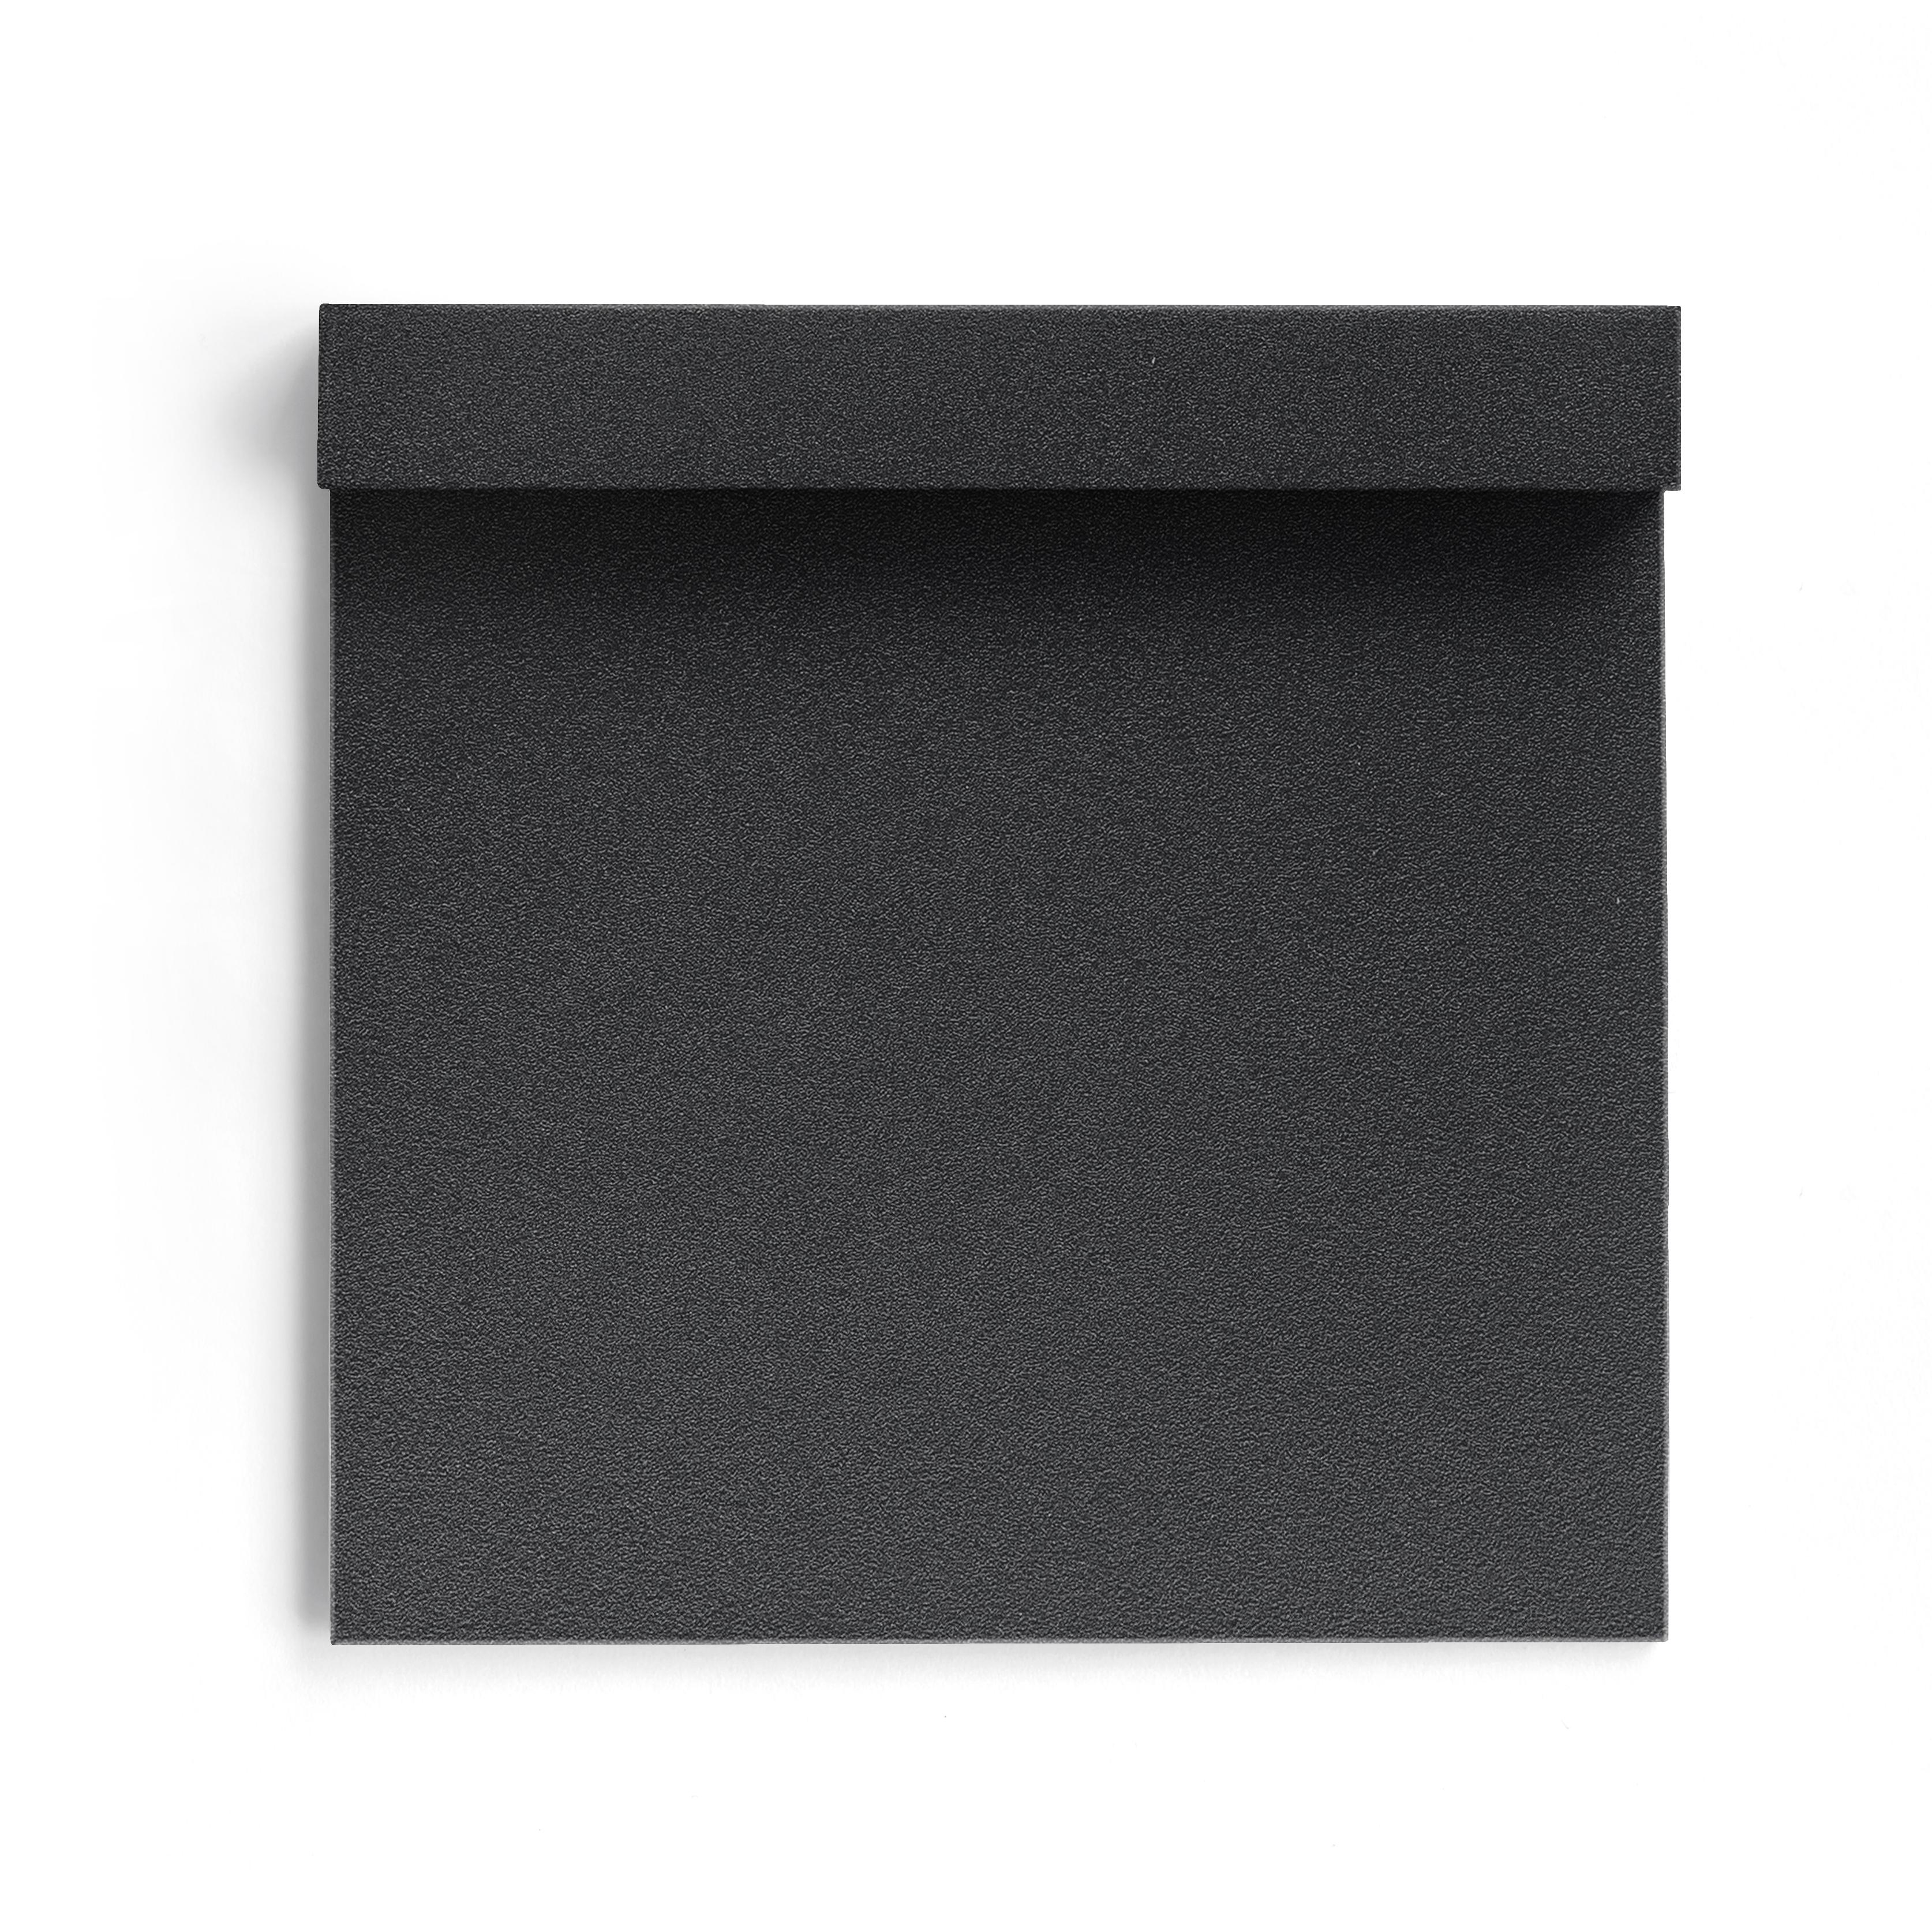 Gallery Product Optiwall Black Steplights Linealightgroup 1200X1200